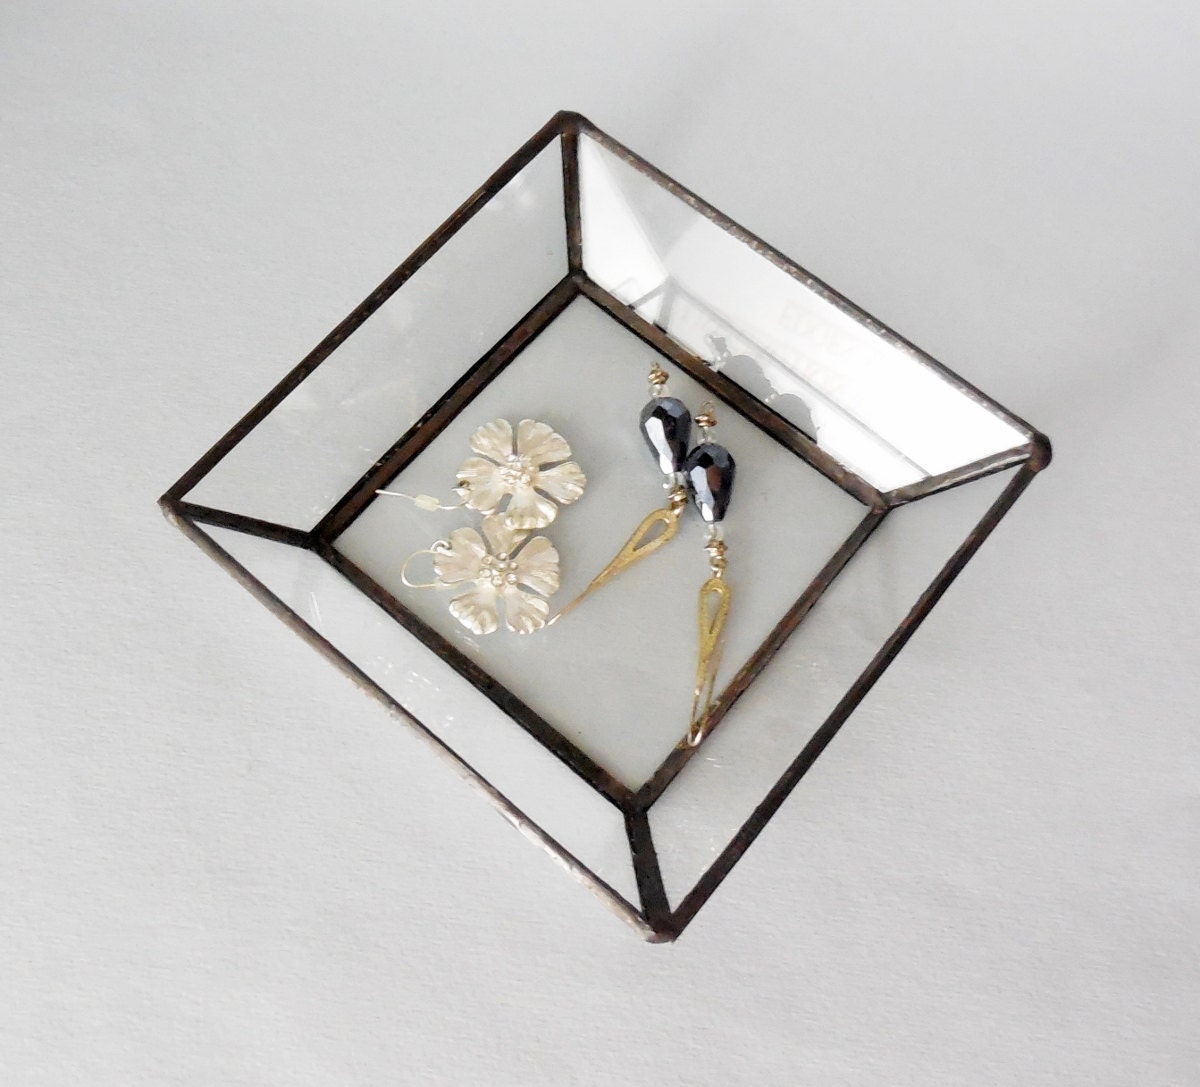 Glass Jewelry Tray For Your Treasured Keepsakes Or Jewelry.